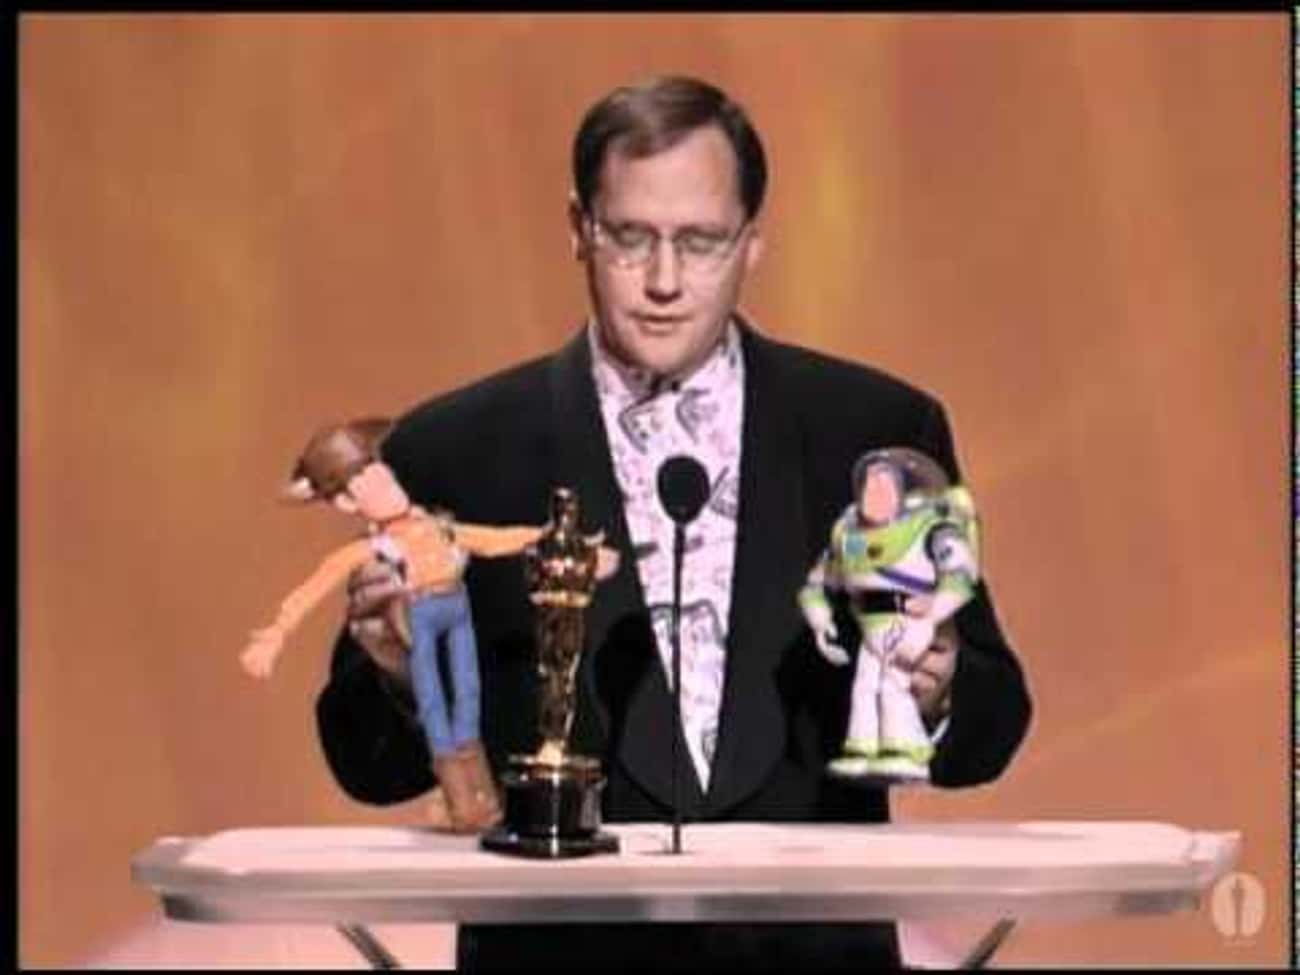 Toy Story Is the Only Computer Generated Film to Receive a Special Achievement Academy Award